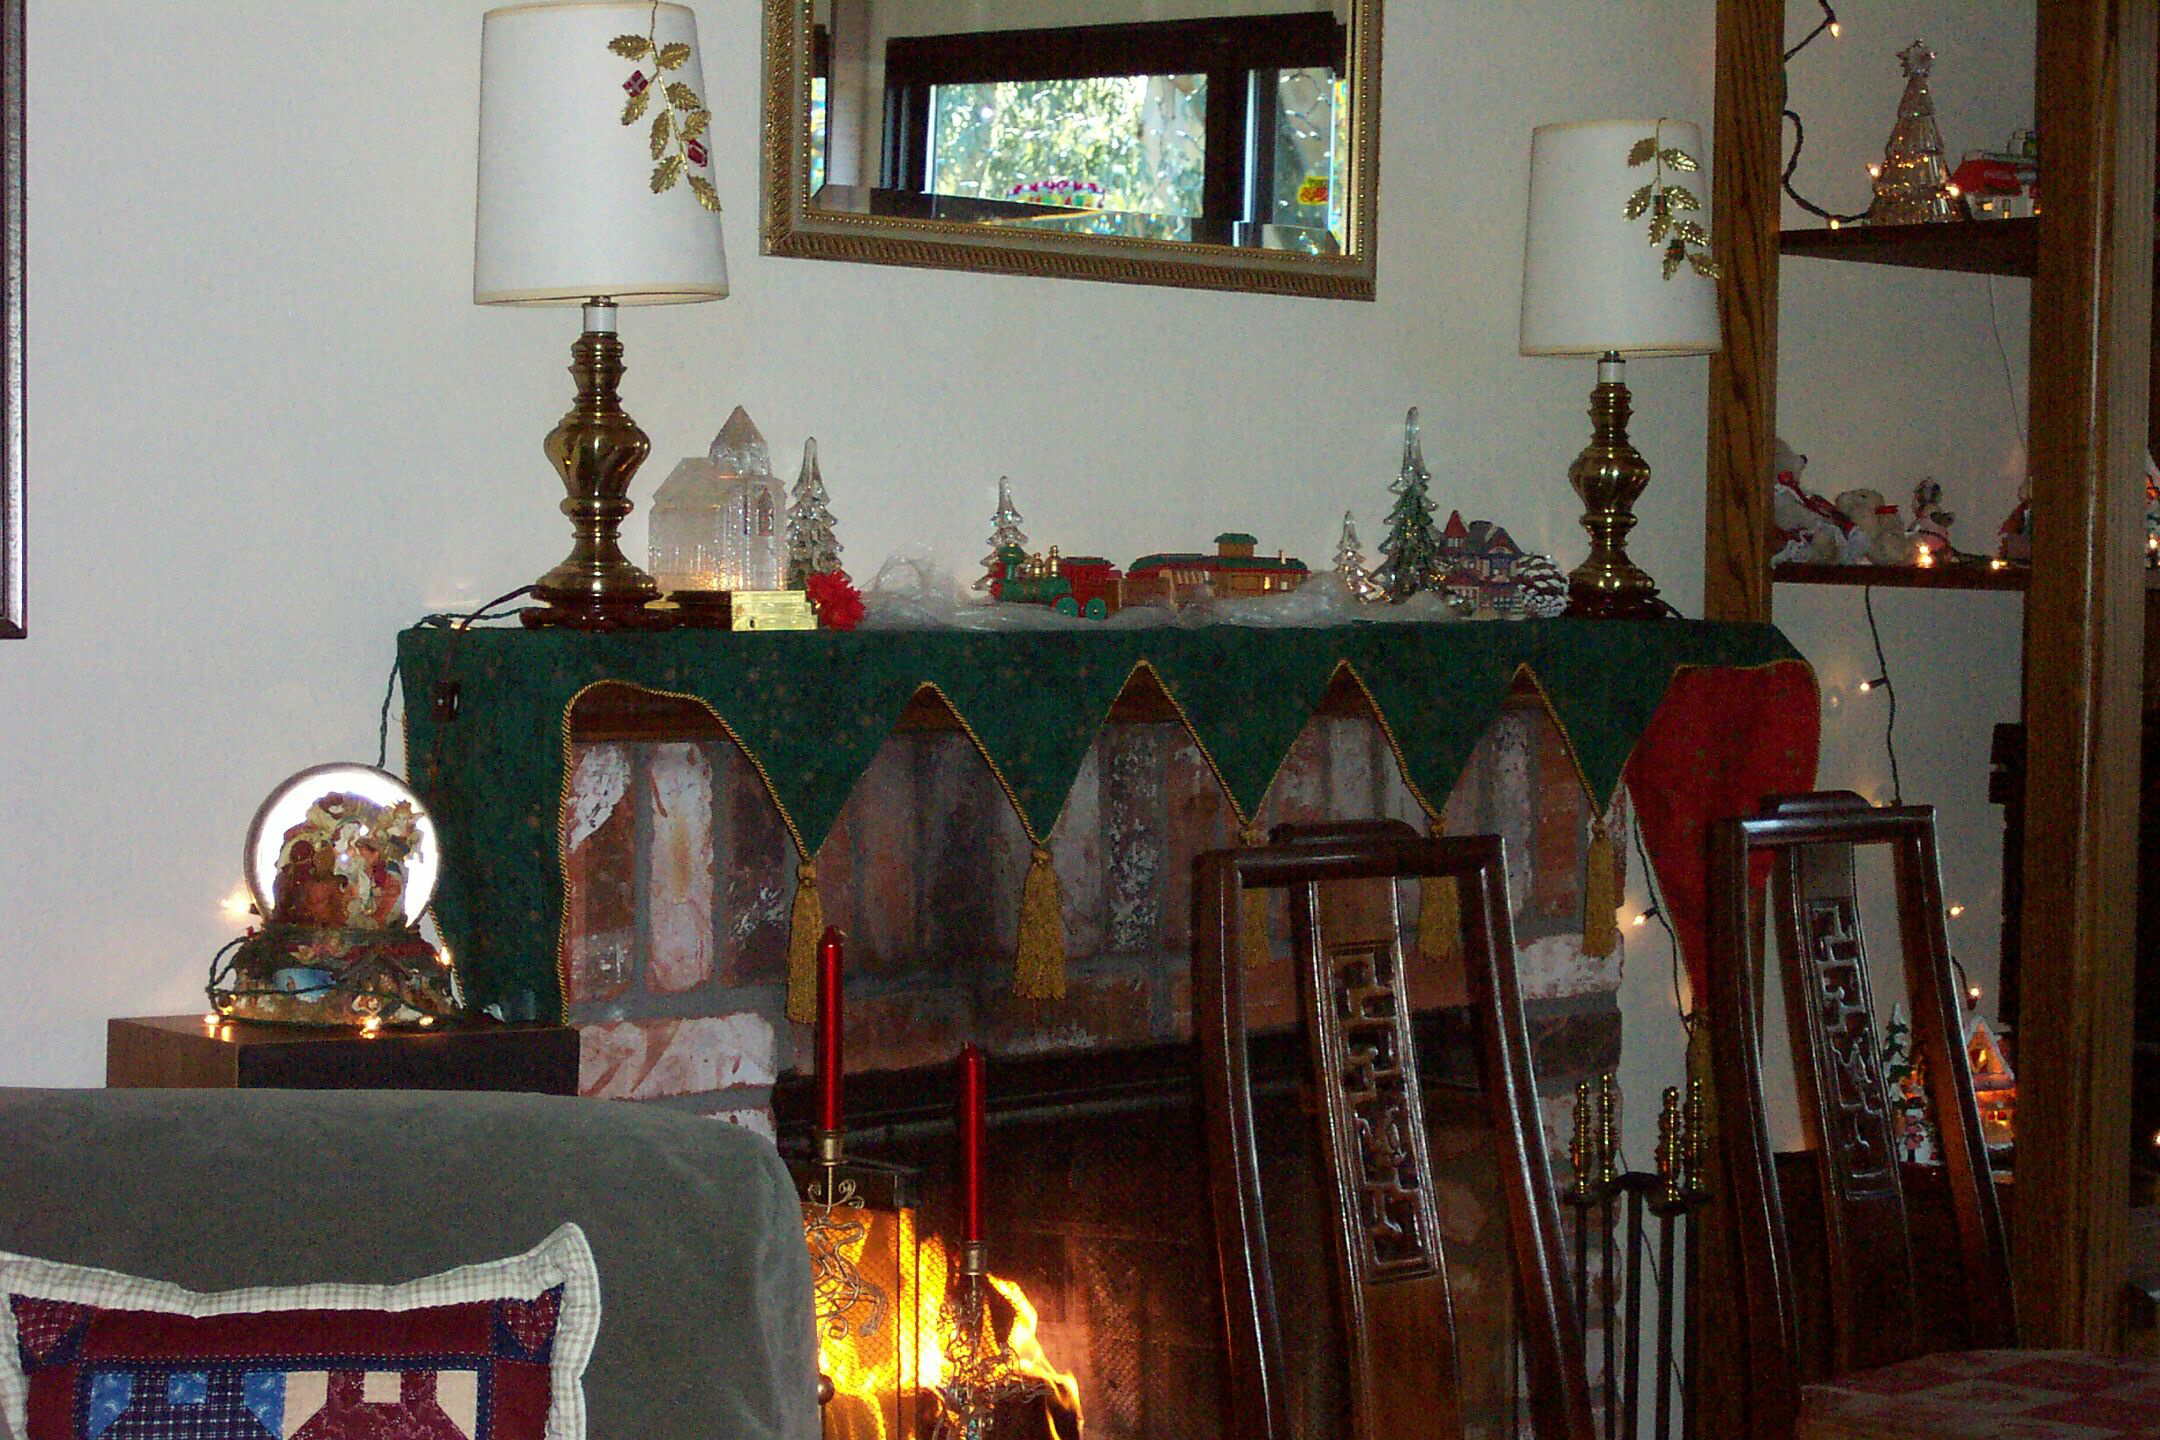 Christmas Decorations- Living room fireplace